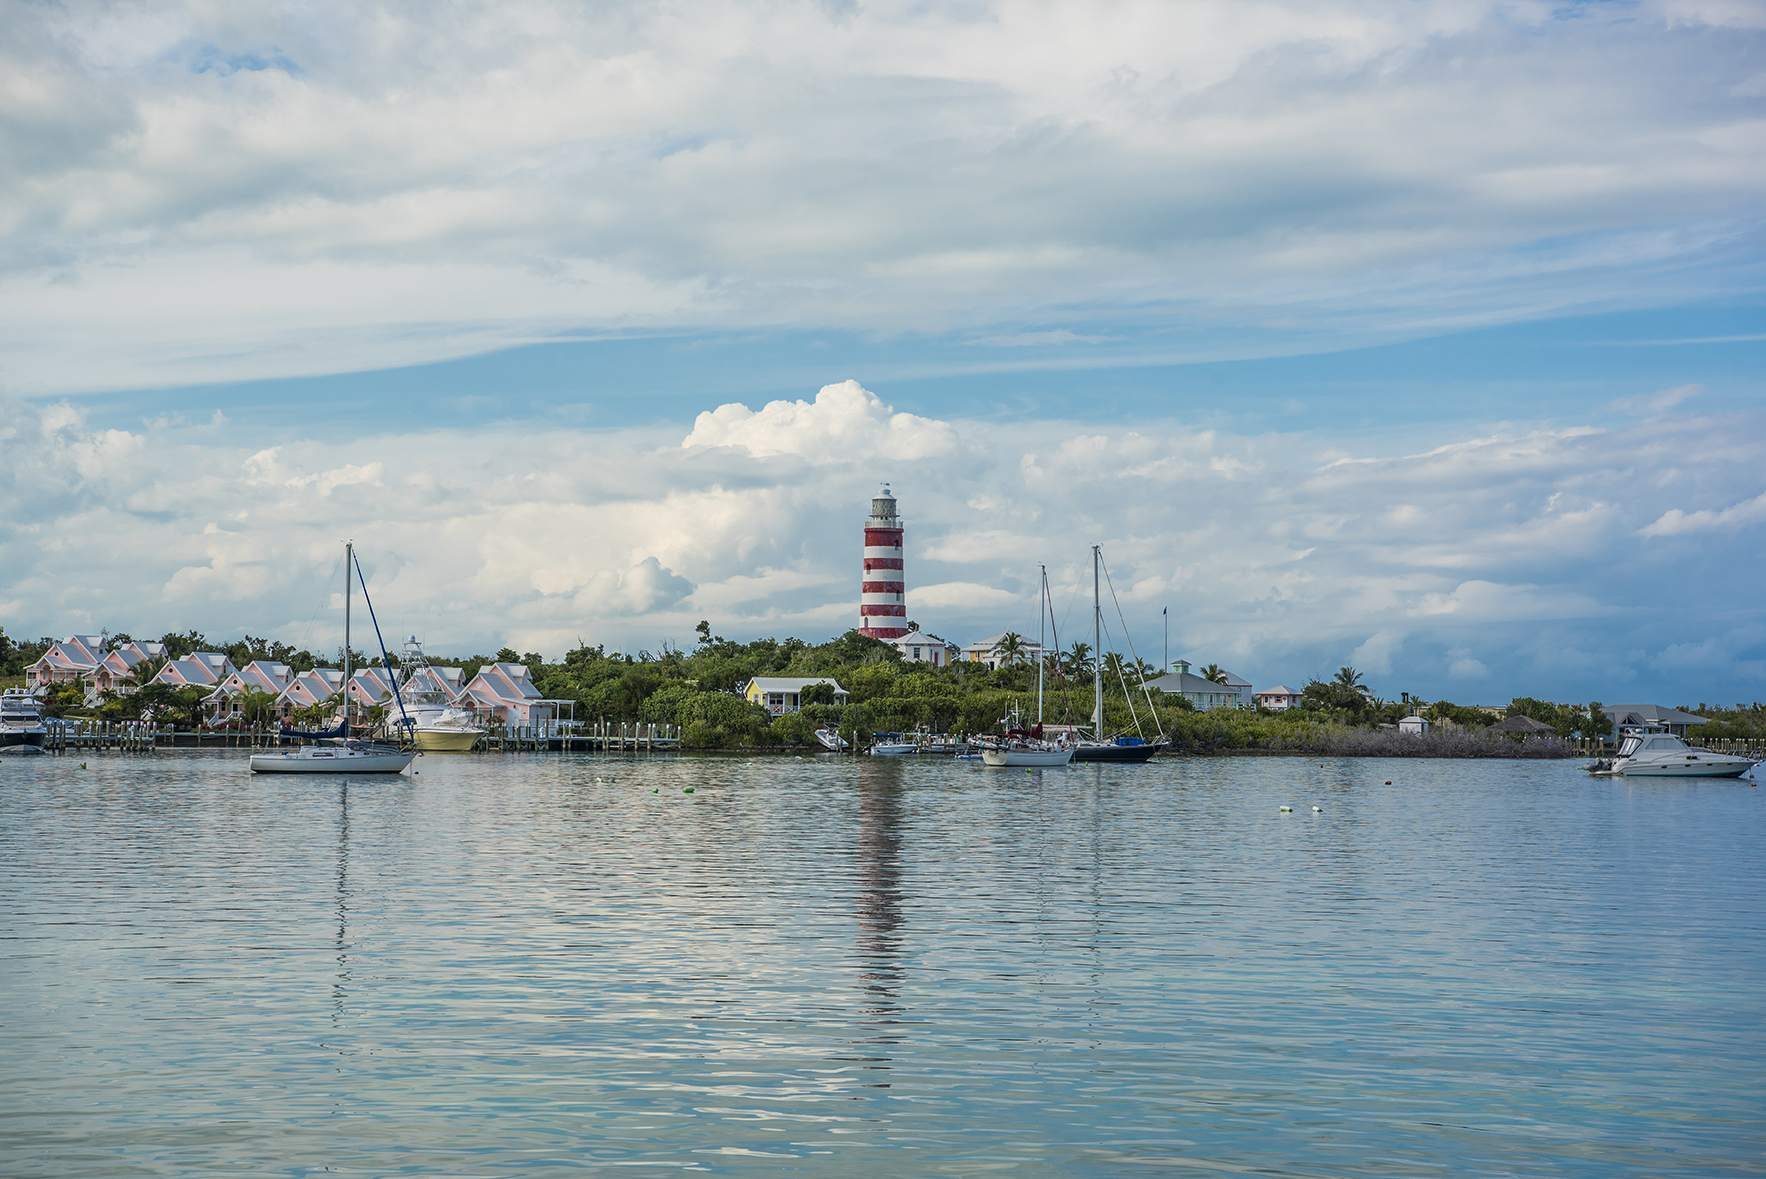 Landscape shot of the Hope Town lighthouse on Elbow Cay, Abaco,